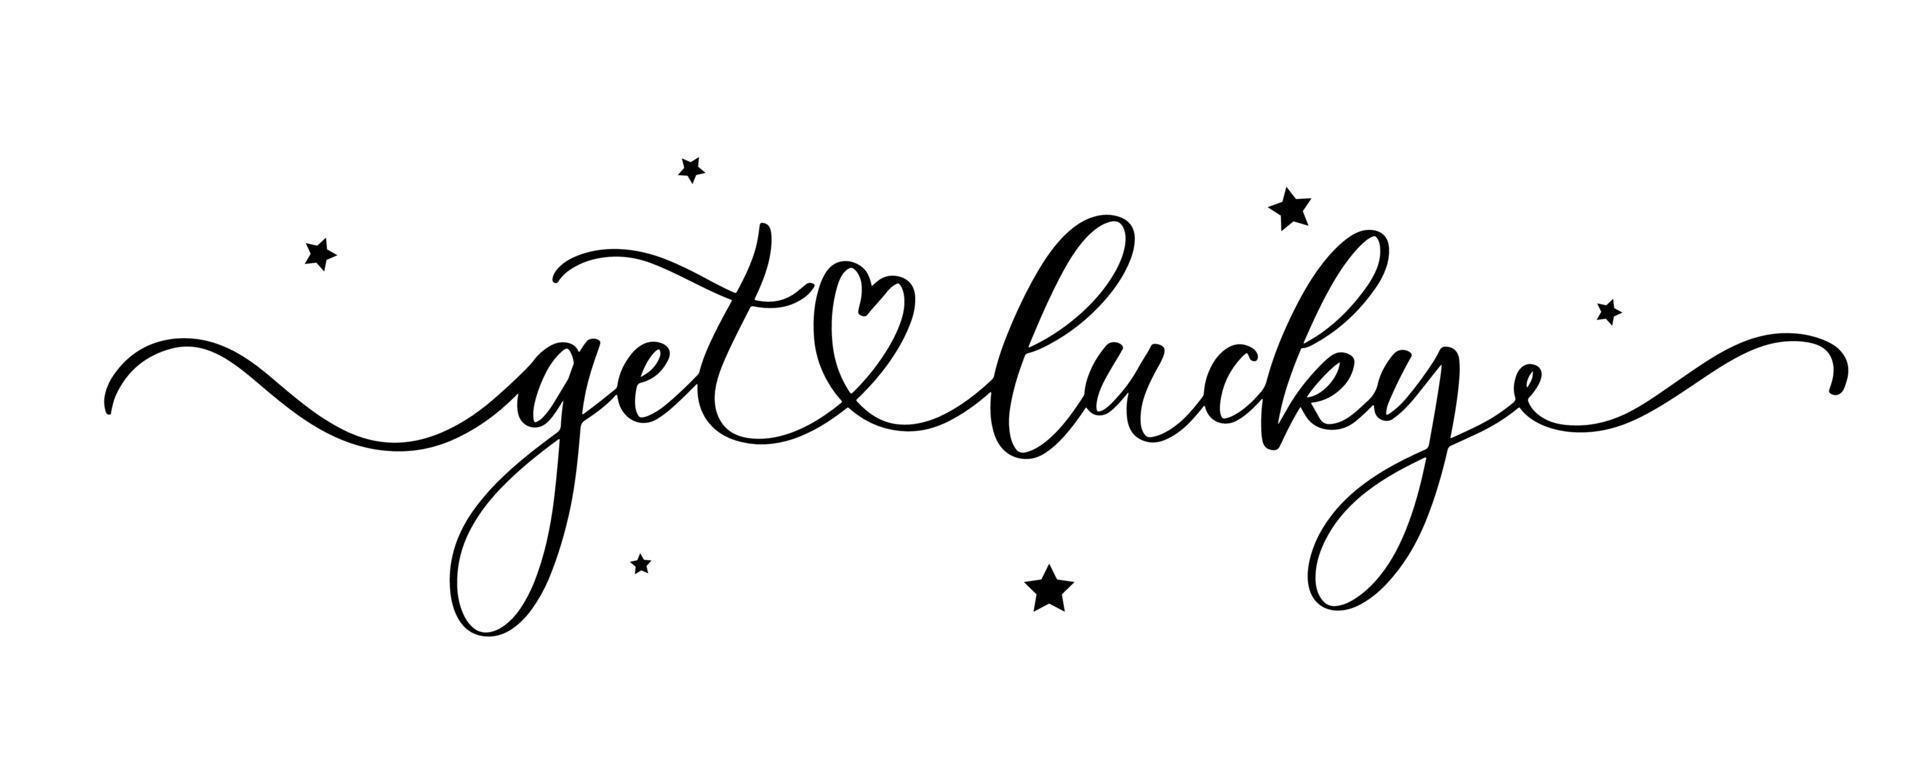 Get Lucky lettering inscription. Handwritten modern calligraphy, brush painted letters. Template for greeting card, poster, logo, badge, icon, banner, tag. vector